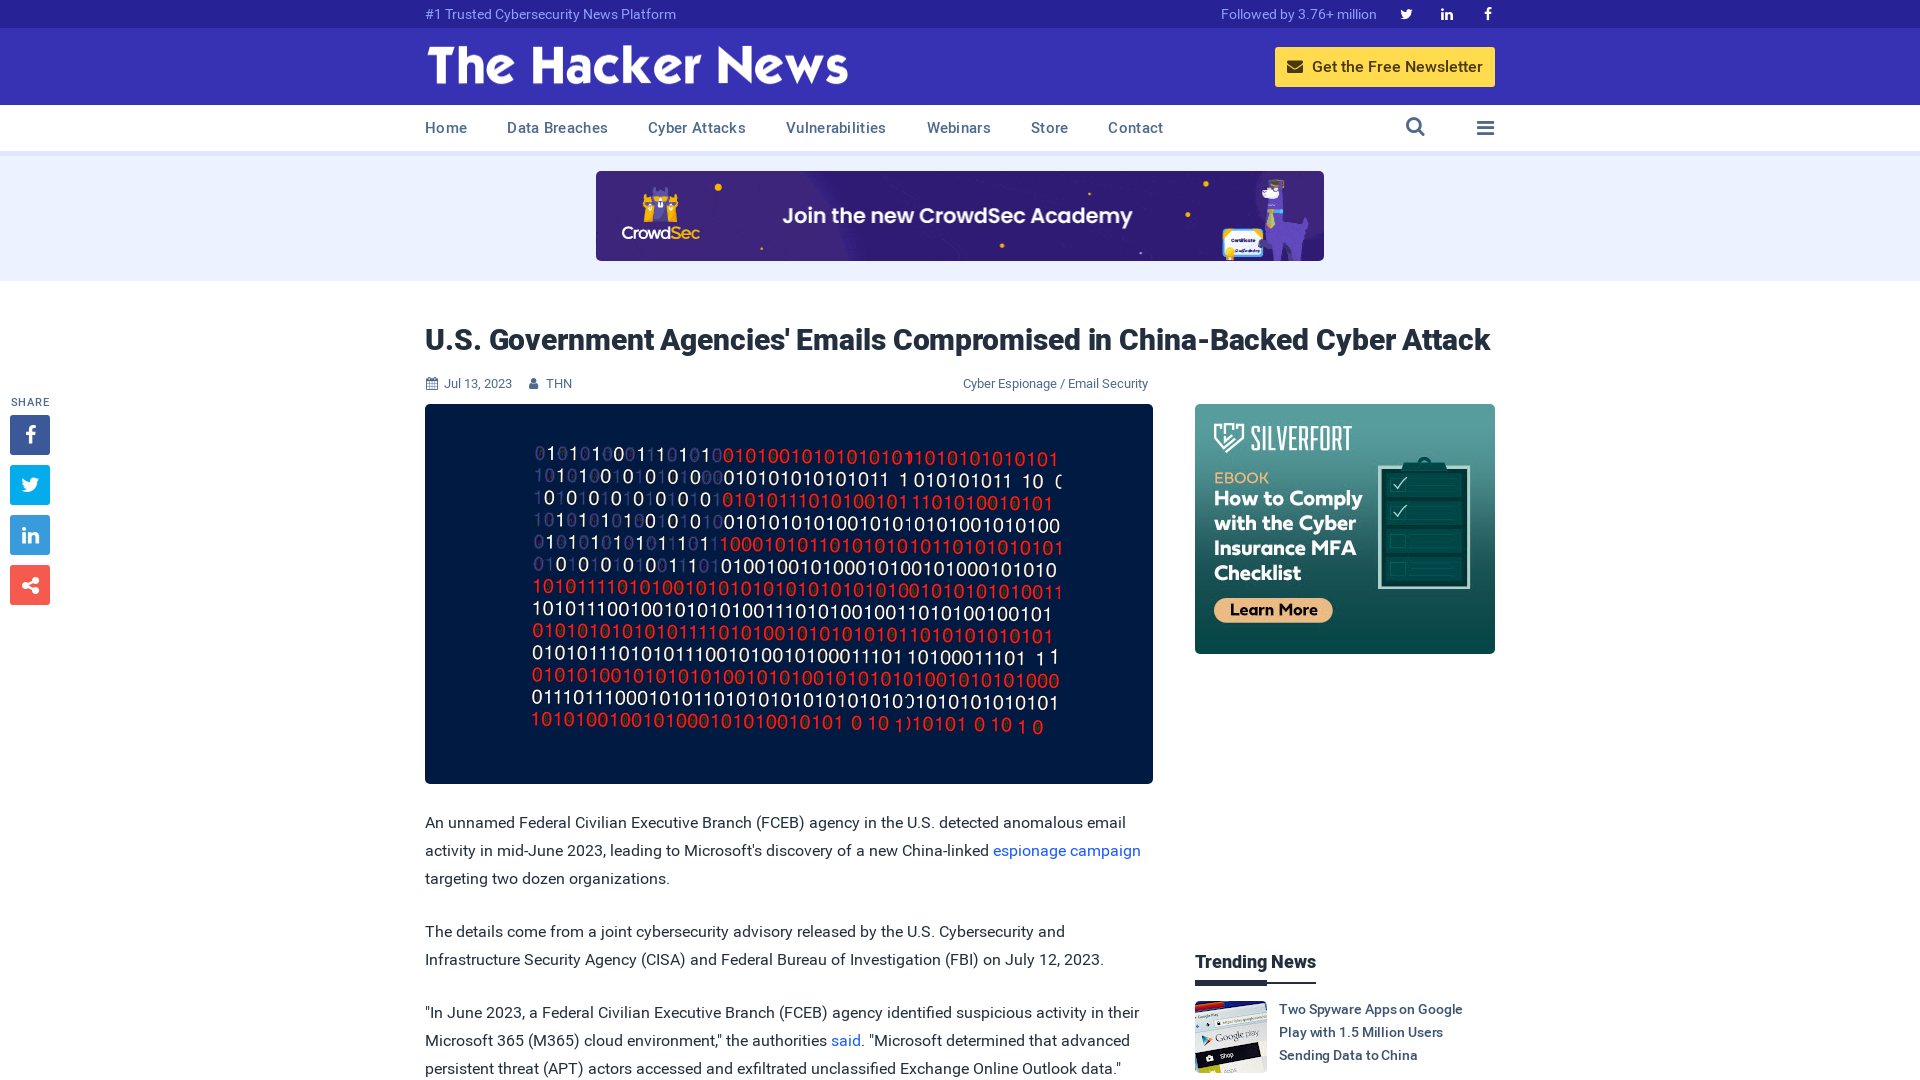 U.S. Government Agencies' Emails Compromised in China-Backed Cyber Attack